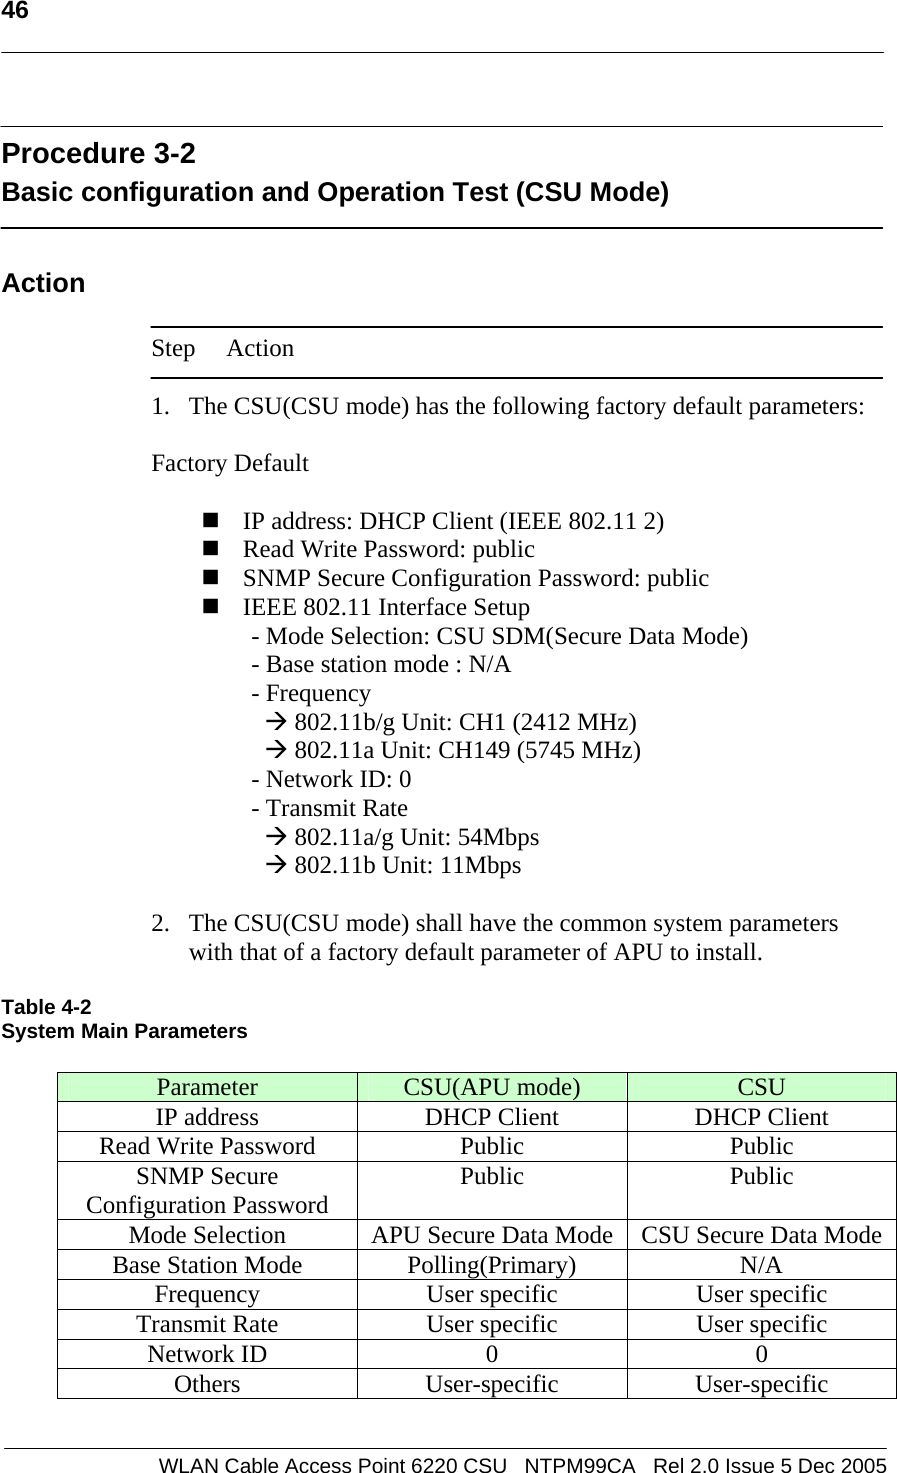   46  WLAN Cable Access Point 6220 CSU   NTPM99CA   Rel 2.0 Issue 5 Dec 2005  Procedure 3-2 Basic configuration and Operation Test (CSU Mode)  Action  Step Action  1. The CSU(CSU mode) has the following factory default parameters:  Factory Default   IP address: DHCP Client (IEEE 802.11 2)  Read Write Password: public  SNMP Secure Configuration Password: public  IEEE 802.11 Interface Setup - Mode Selection: CSU SDM(Secure Data Mode)  - Base station mode : N/A             - Frequency Æ 802.11b/g Unit: CH1 (2412 MHz)  Æ 802.11a Unit: CH149 (5745 MHz)              - Network ID: 0 - Transmit Rate Æ 802.11a/g Unit: 54Mbps Æ 802.11b Unit: 11Mbps  2. The CSU(CSU mode) shall have the common system parameters with that of a factory default parameter of APU to install.   Table 4-2 System Main Parameters  Parameter  CSU(APU mode)  CSU IP address  DHCP Client  DHCP Client Read Write Password  Public  Public SNMP Secure Configuration Password  Public Public Mode Selection  APU Secure Data Mode CSU Secure Data ModeBase Station Mode  Polling(Primary)  N/A Frequency  User specific  User specific Transmit Rate  User specific  User specific Network ID  0  0 Others User-specific User-specific  